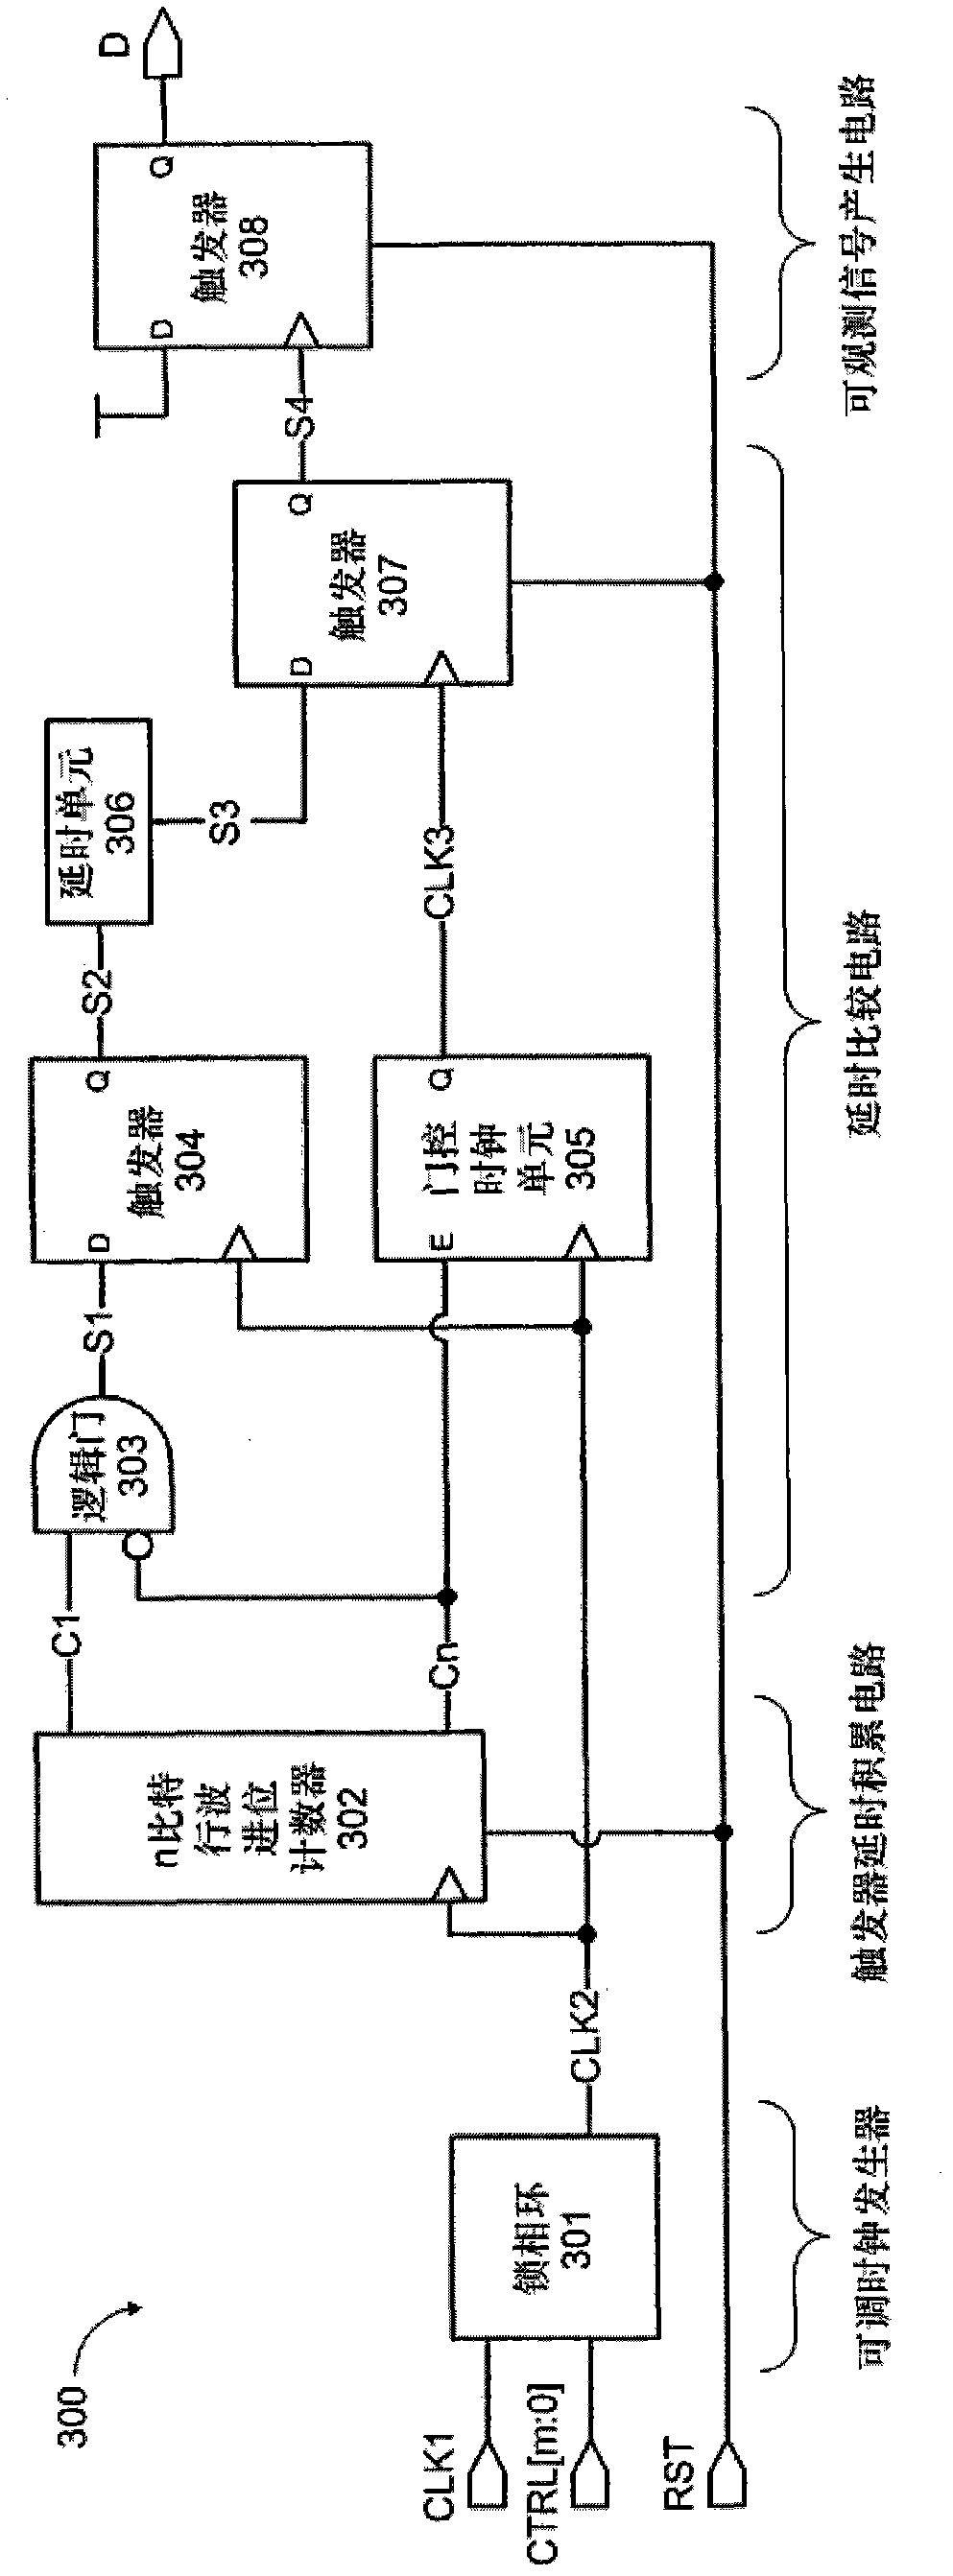 Built-in testing method for delay of trigger and circuit